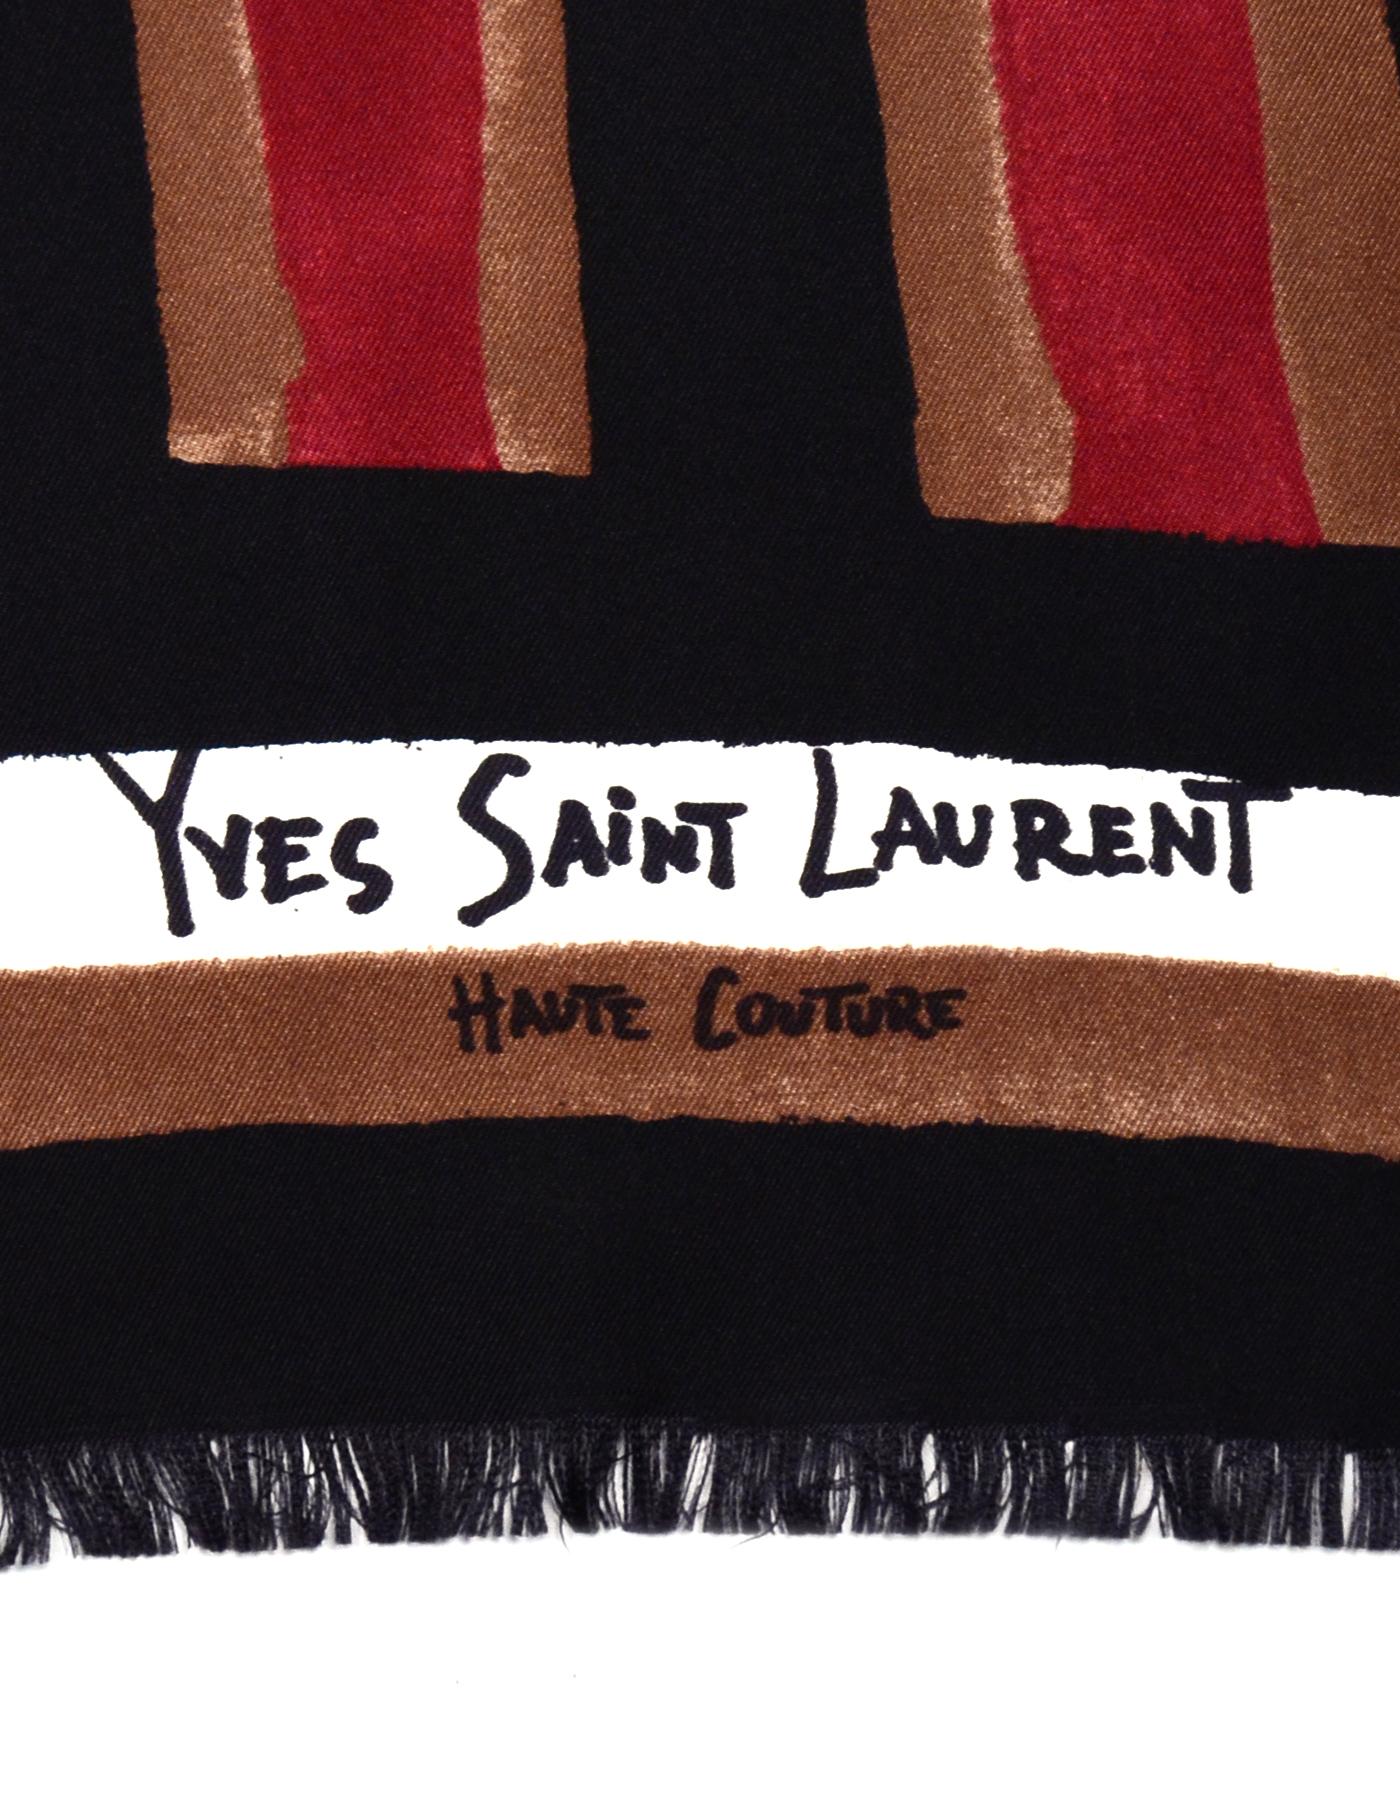 Women's Yves Saint Laurent Haute Couture Black/Brown/Red Striped 35